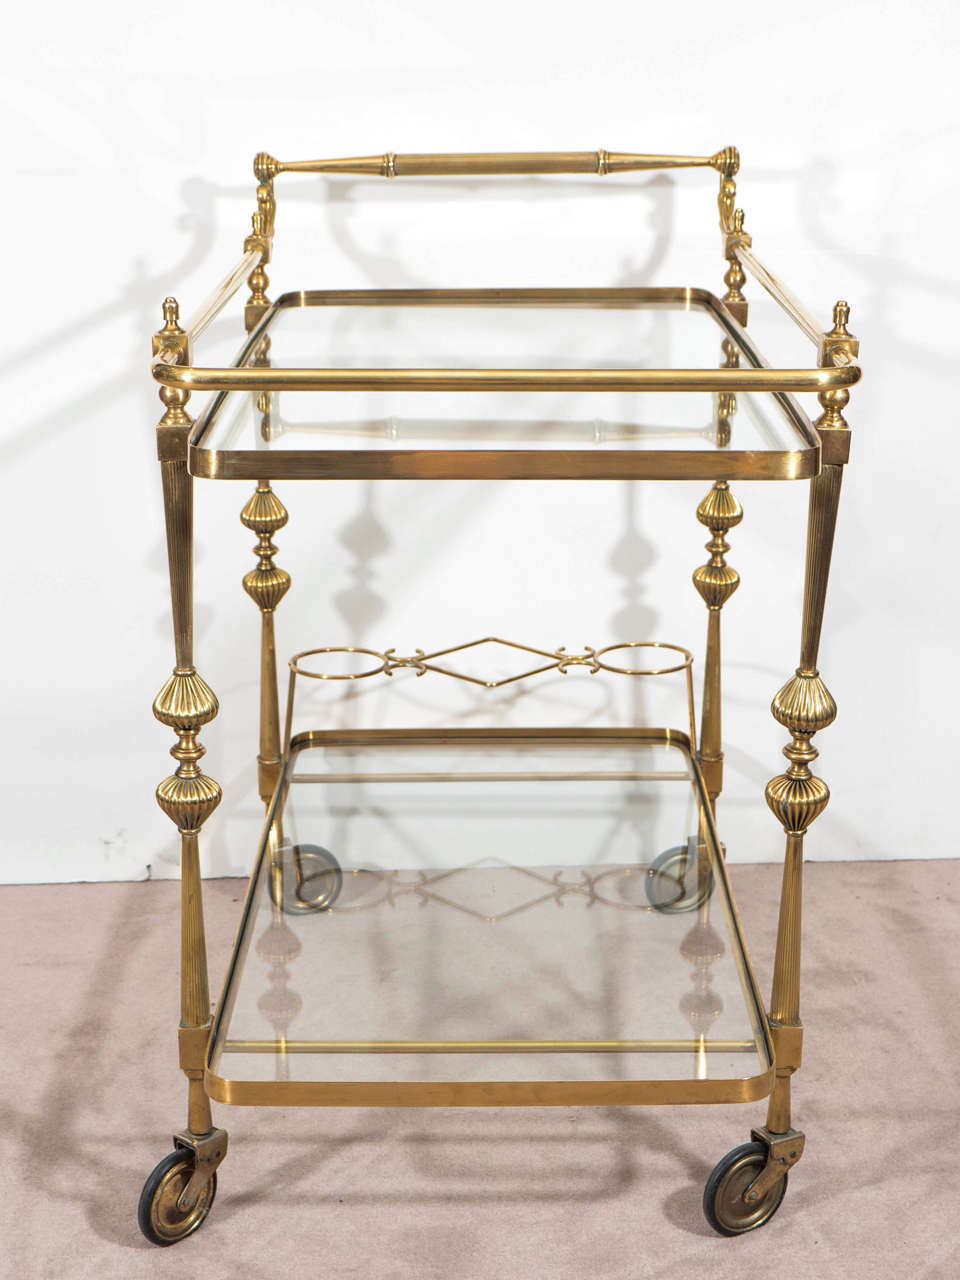 20th Century A Midcentury Hollywood Regency Brass Bar Cart with Wine Holders